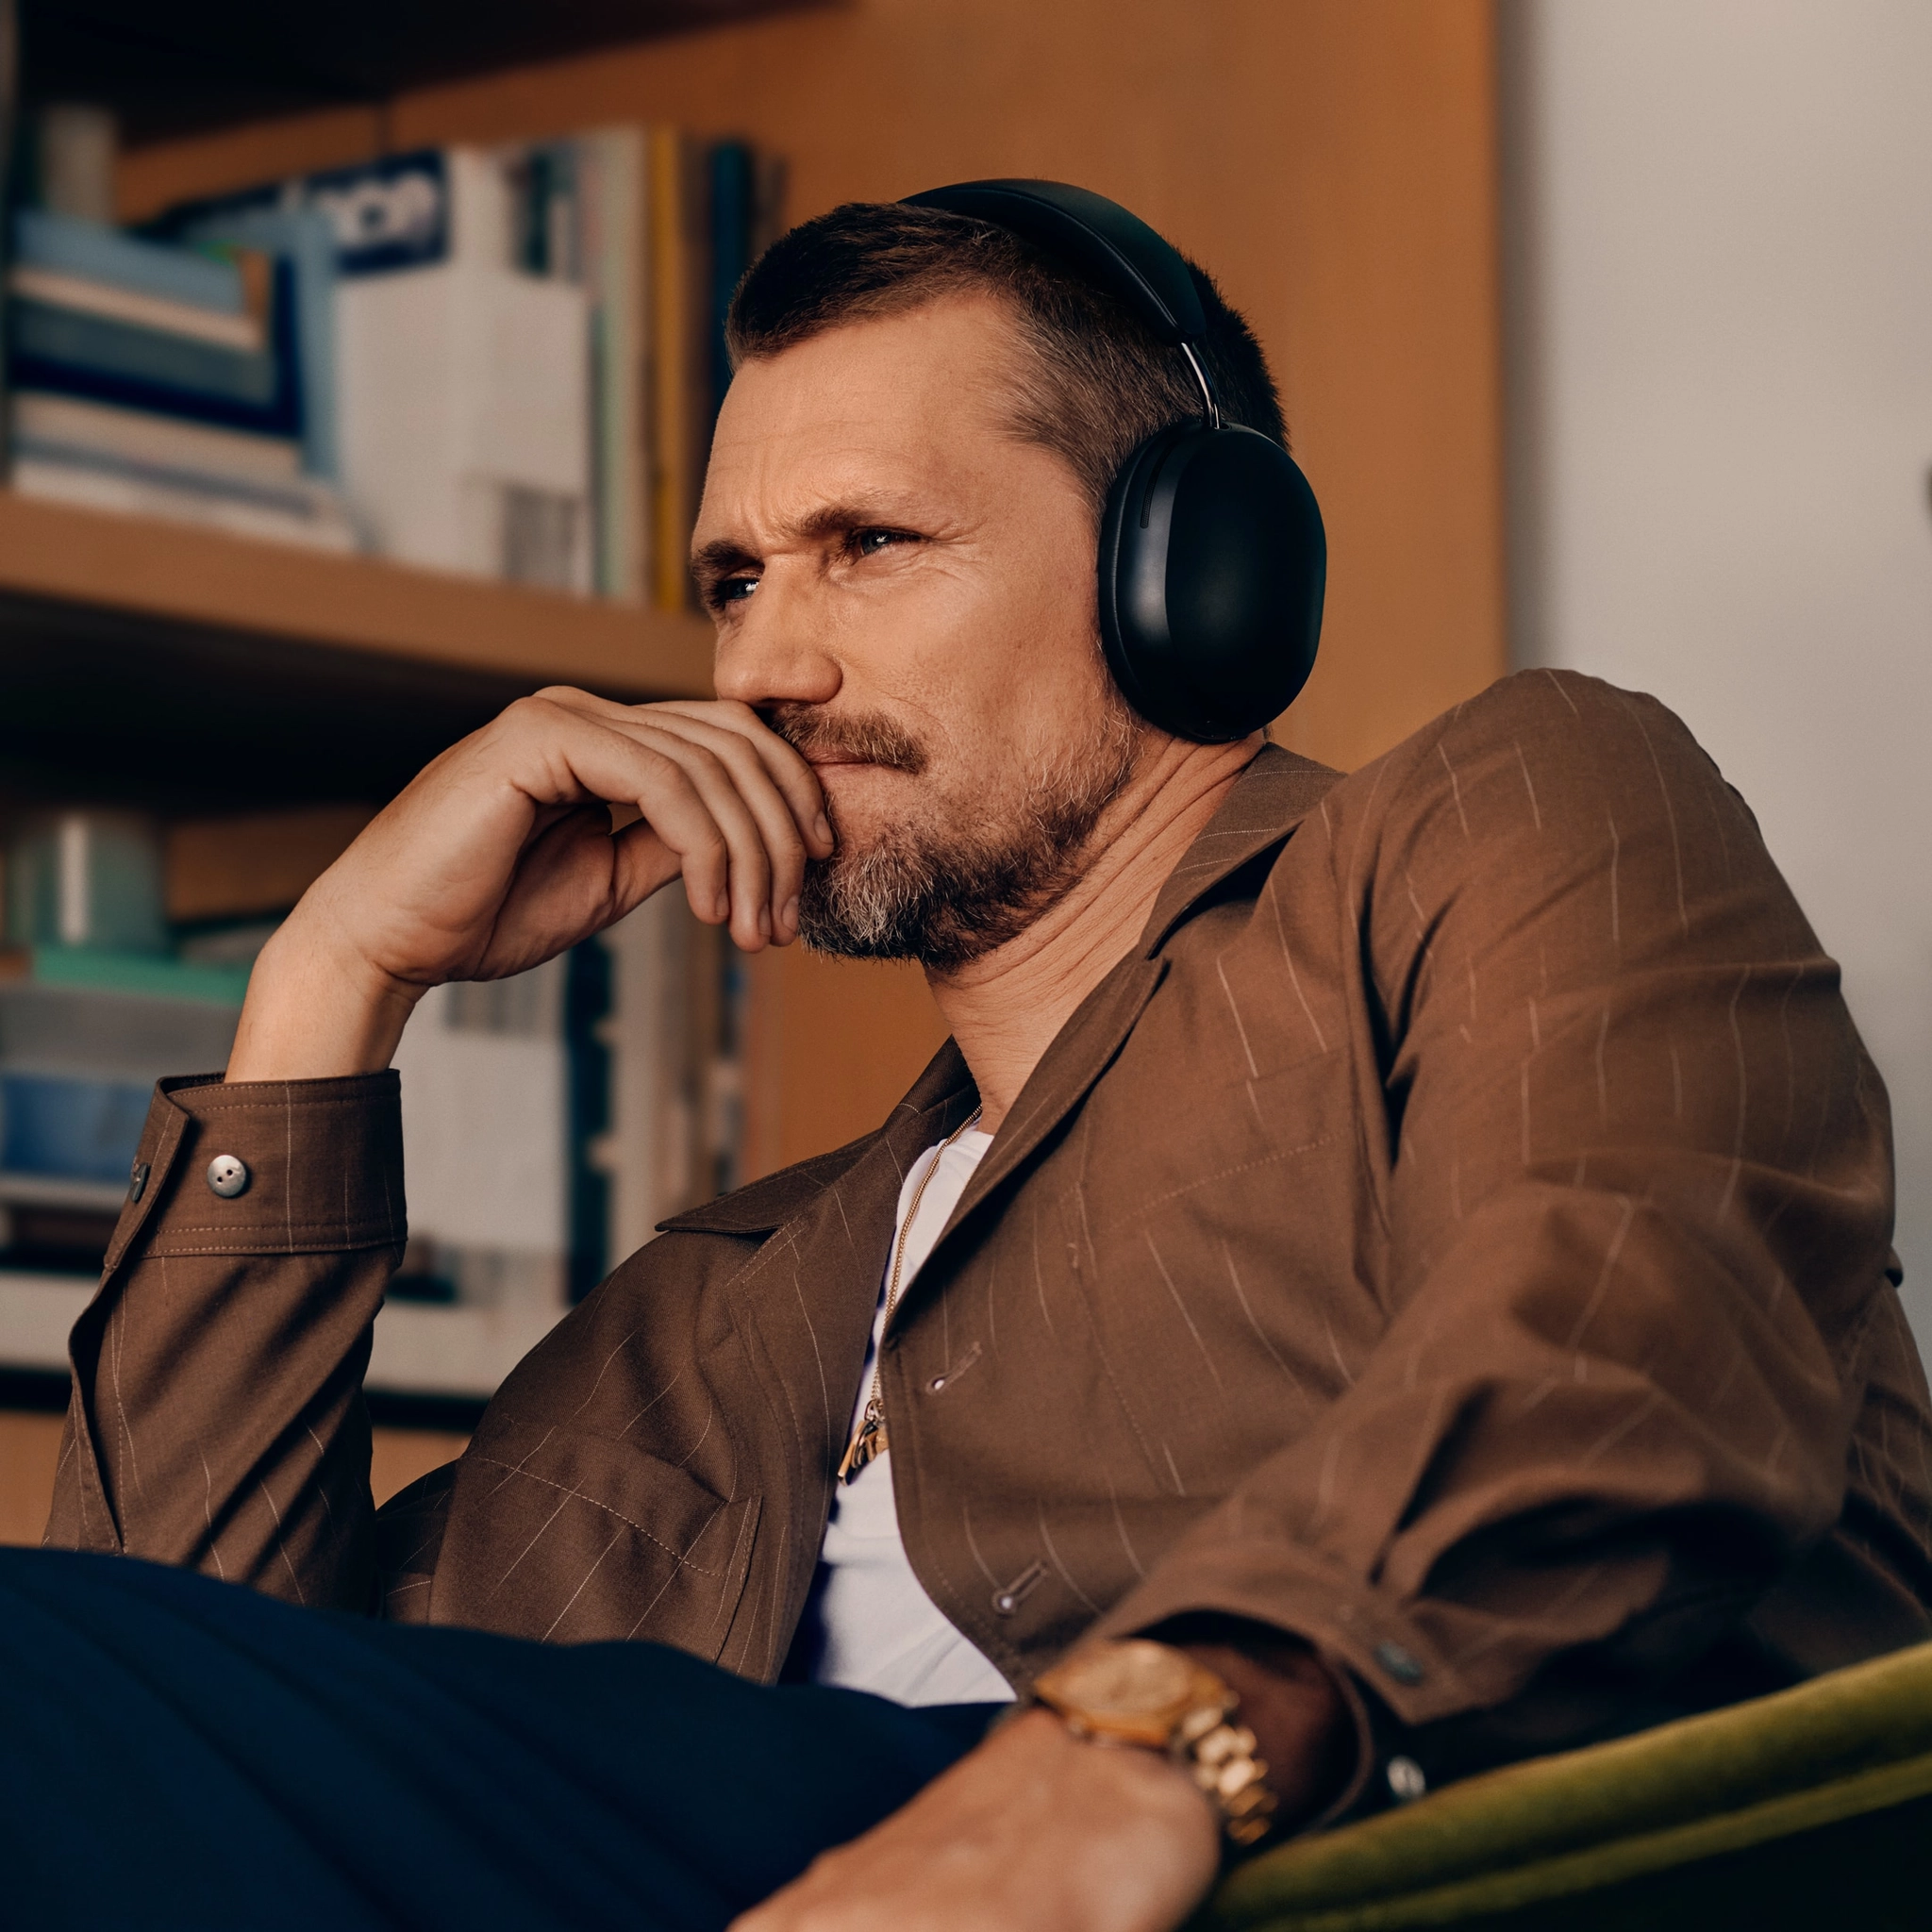 Sonos Ace Headphones - A Man With A Beard Is Wearing Large New Sonos Ace Headphones And A Brown Jacket While Sitting In A Chair, Appearing Thoughtful. There Are Bookshelves In The Background.